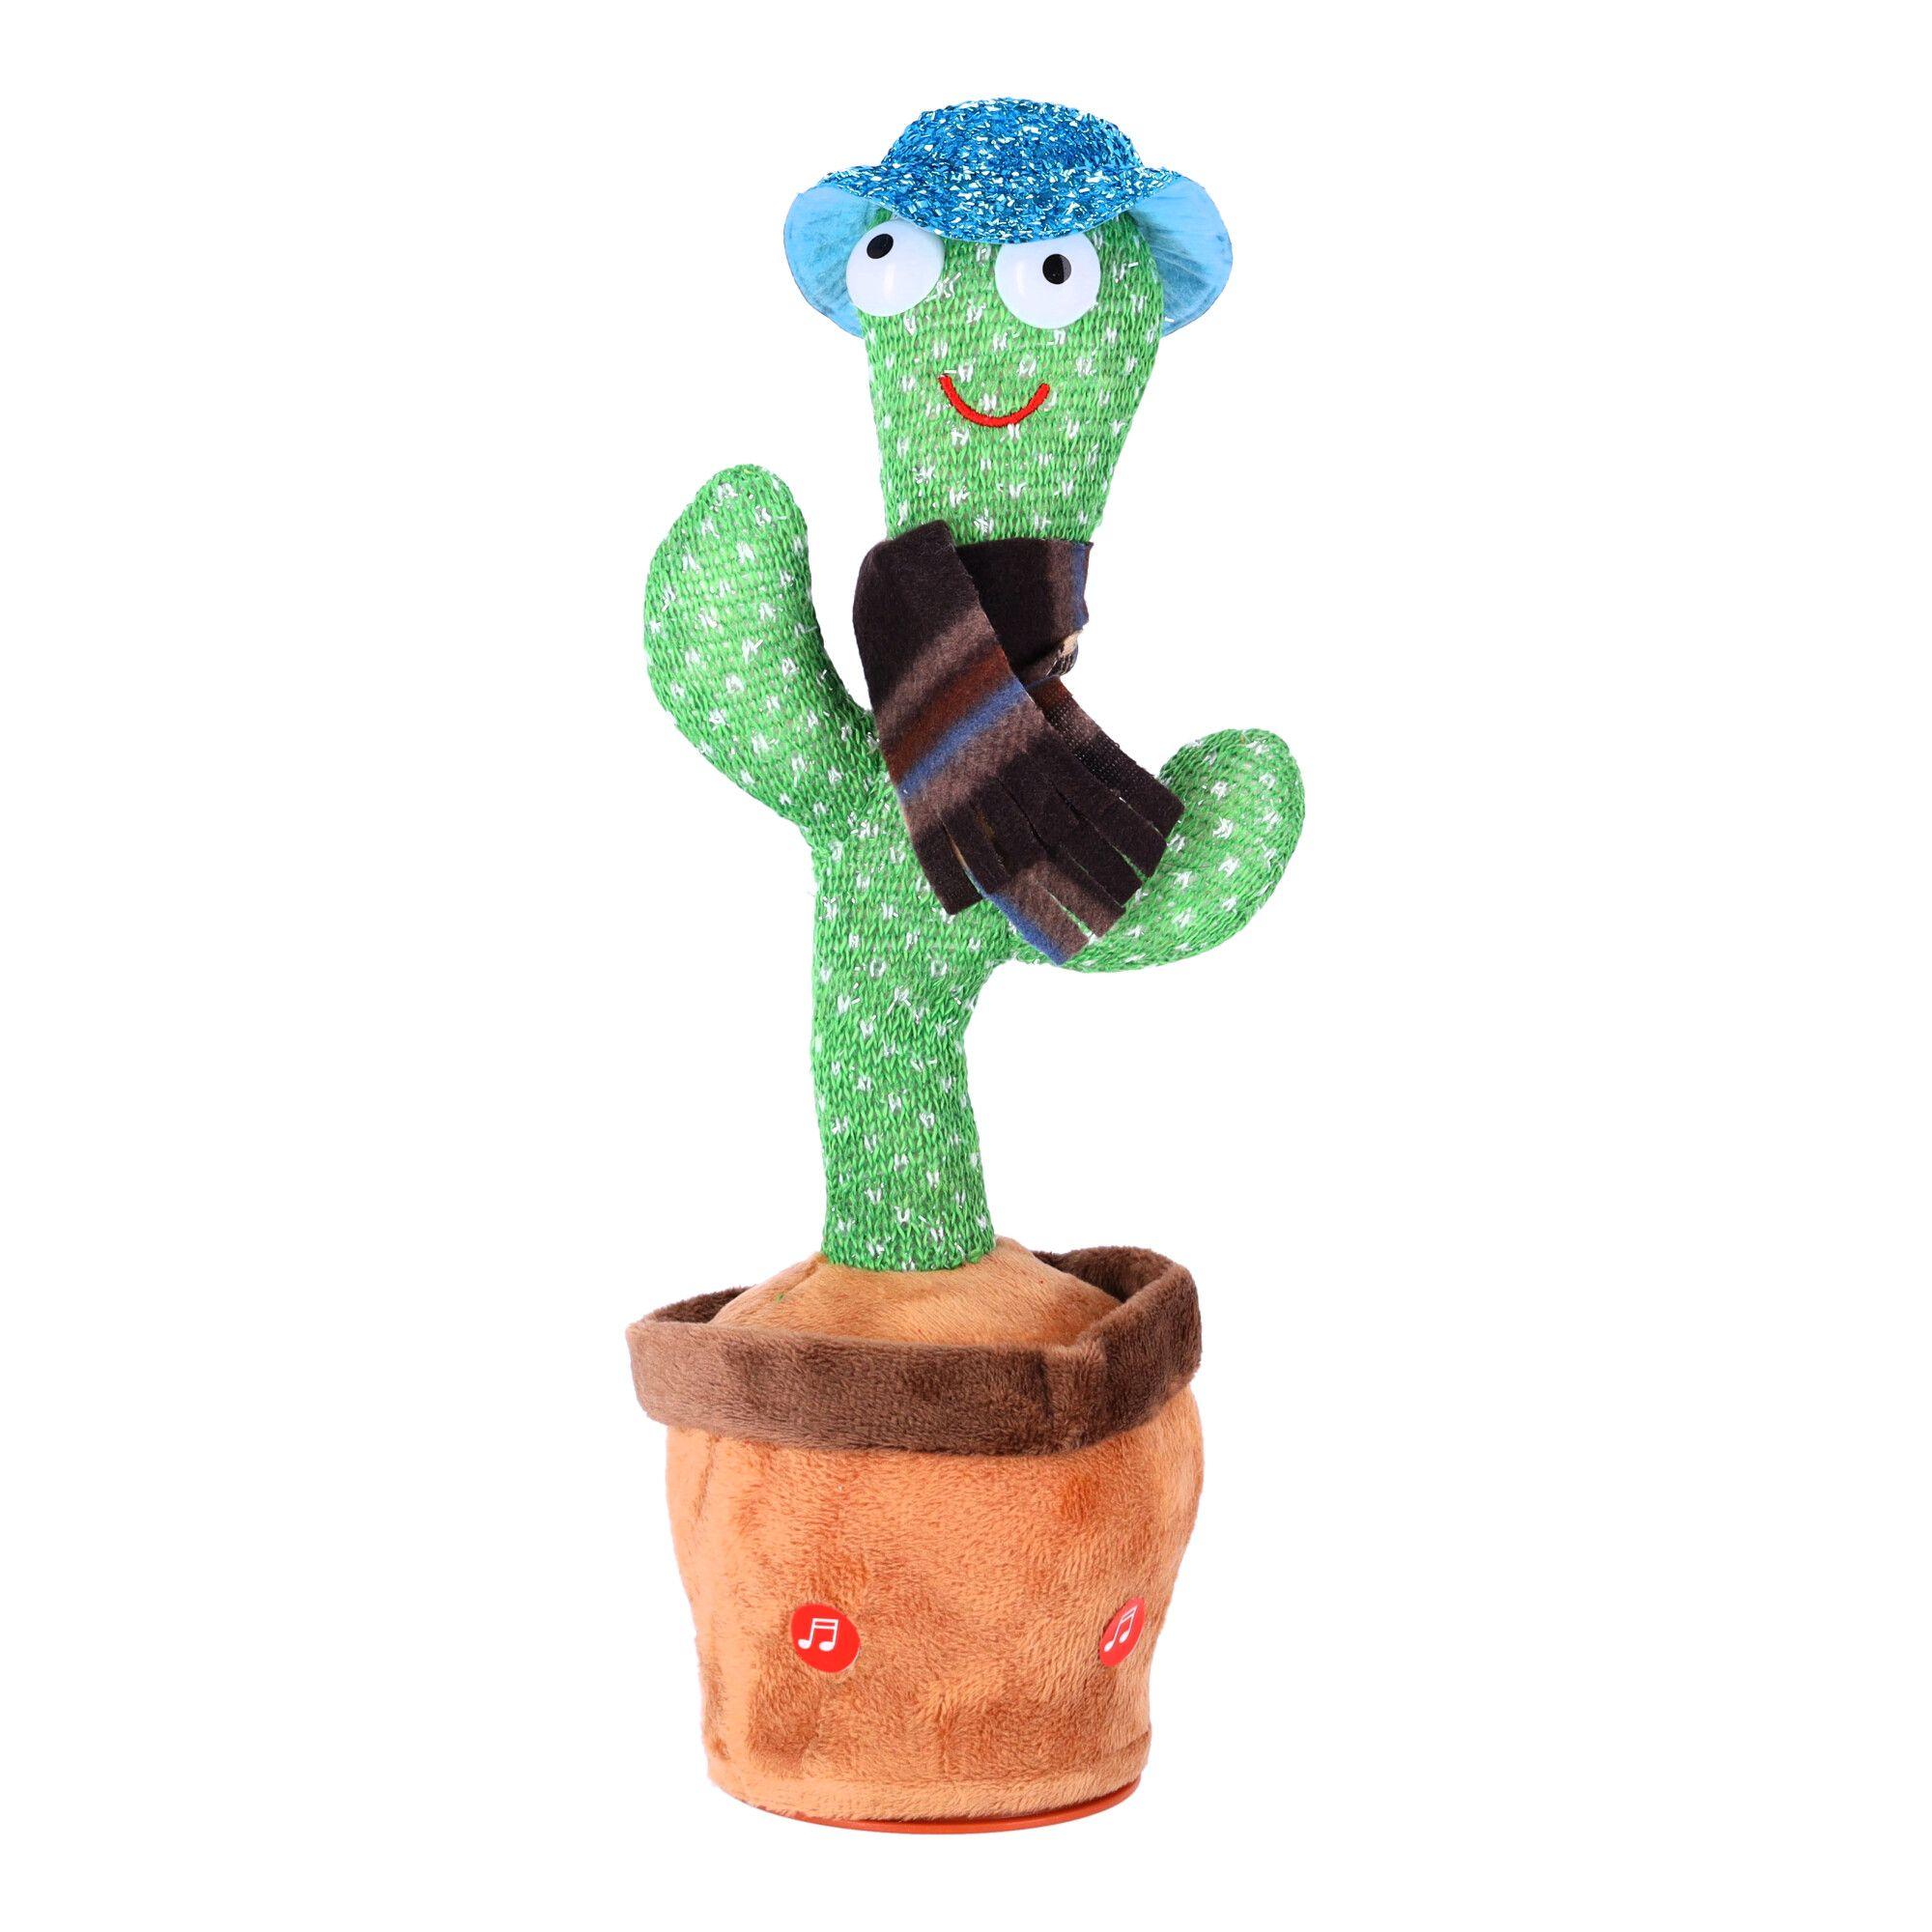 Children's toy - Dancing cactus - with checkered scarf and blue hat